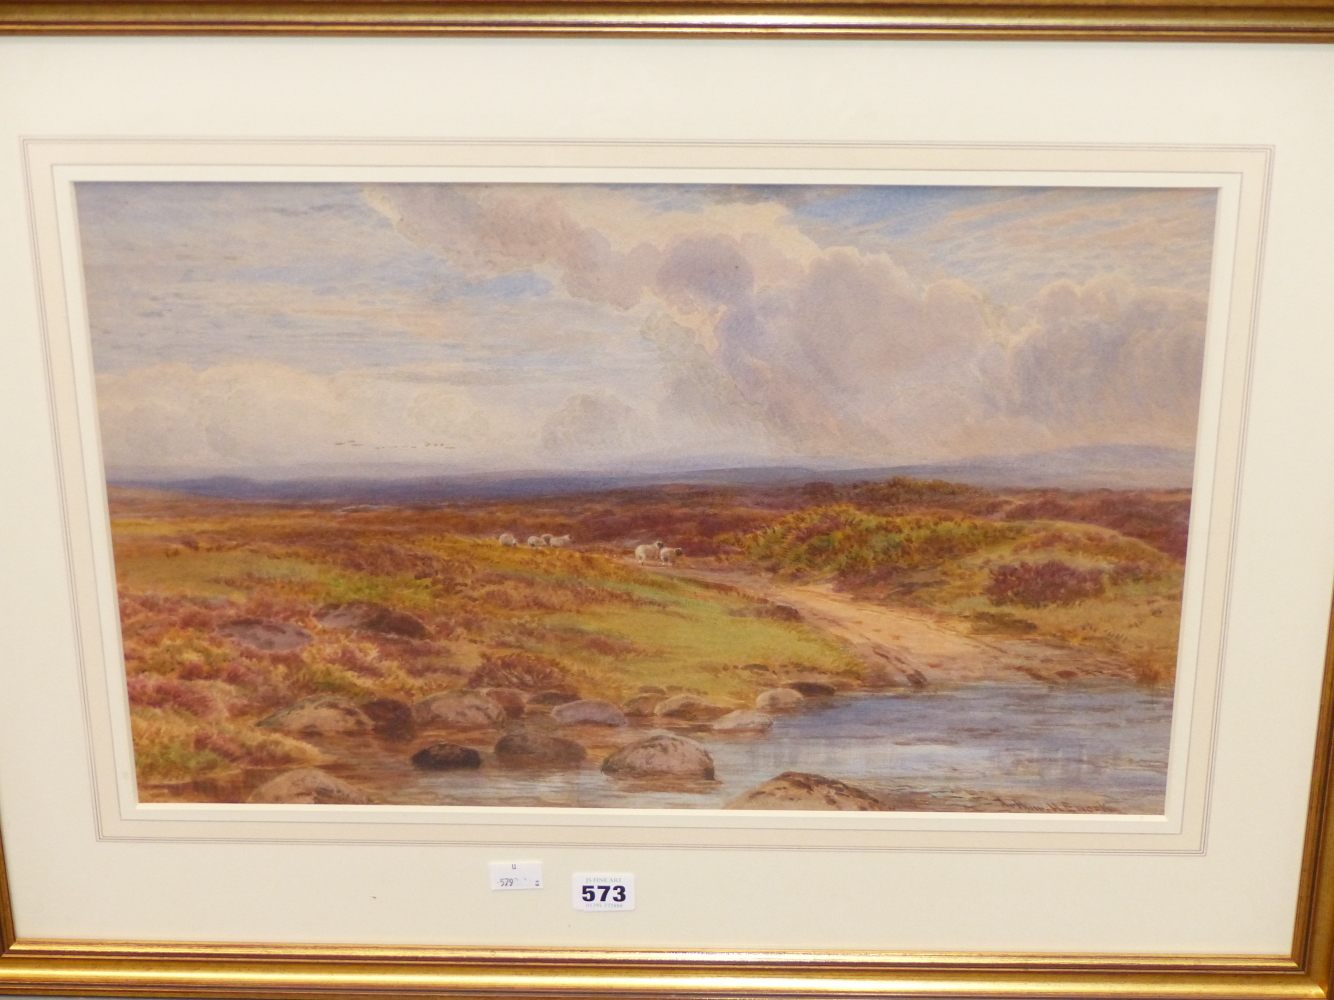 ARTHUR HENRY ENOCK (1828-1917), EXTENSIVE MOORLAND LANDSCAPE WITH SHEEP, SIGNED, WATERCOLOUR, 51 x - Image 2 of 5